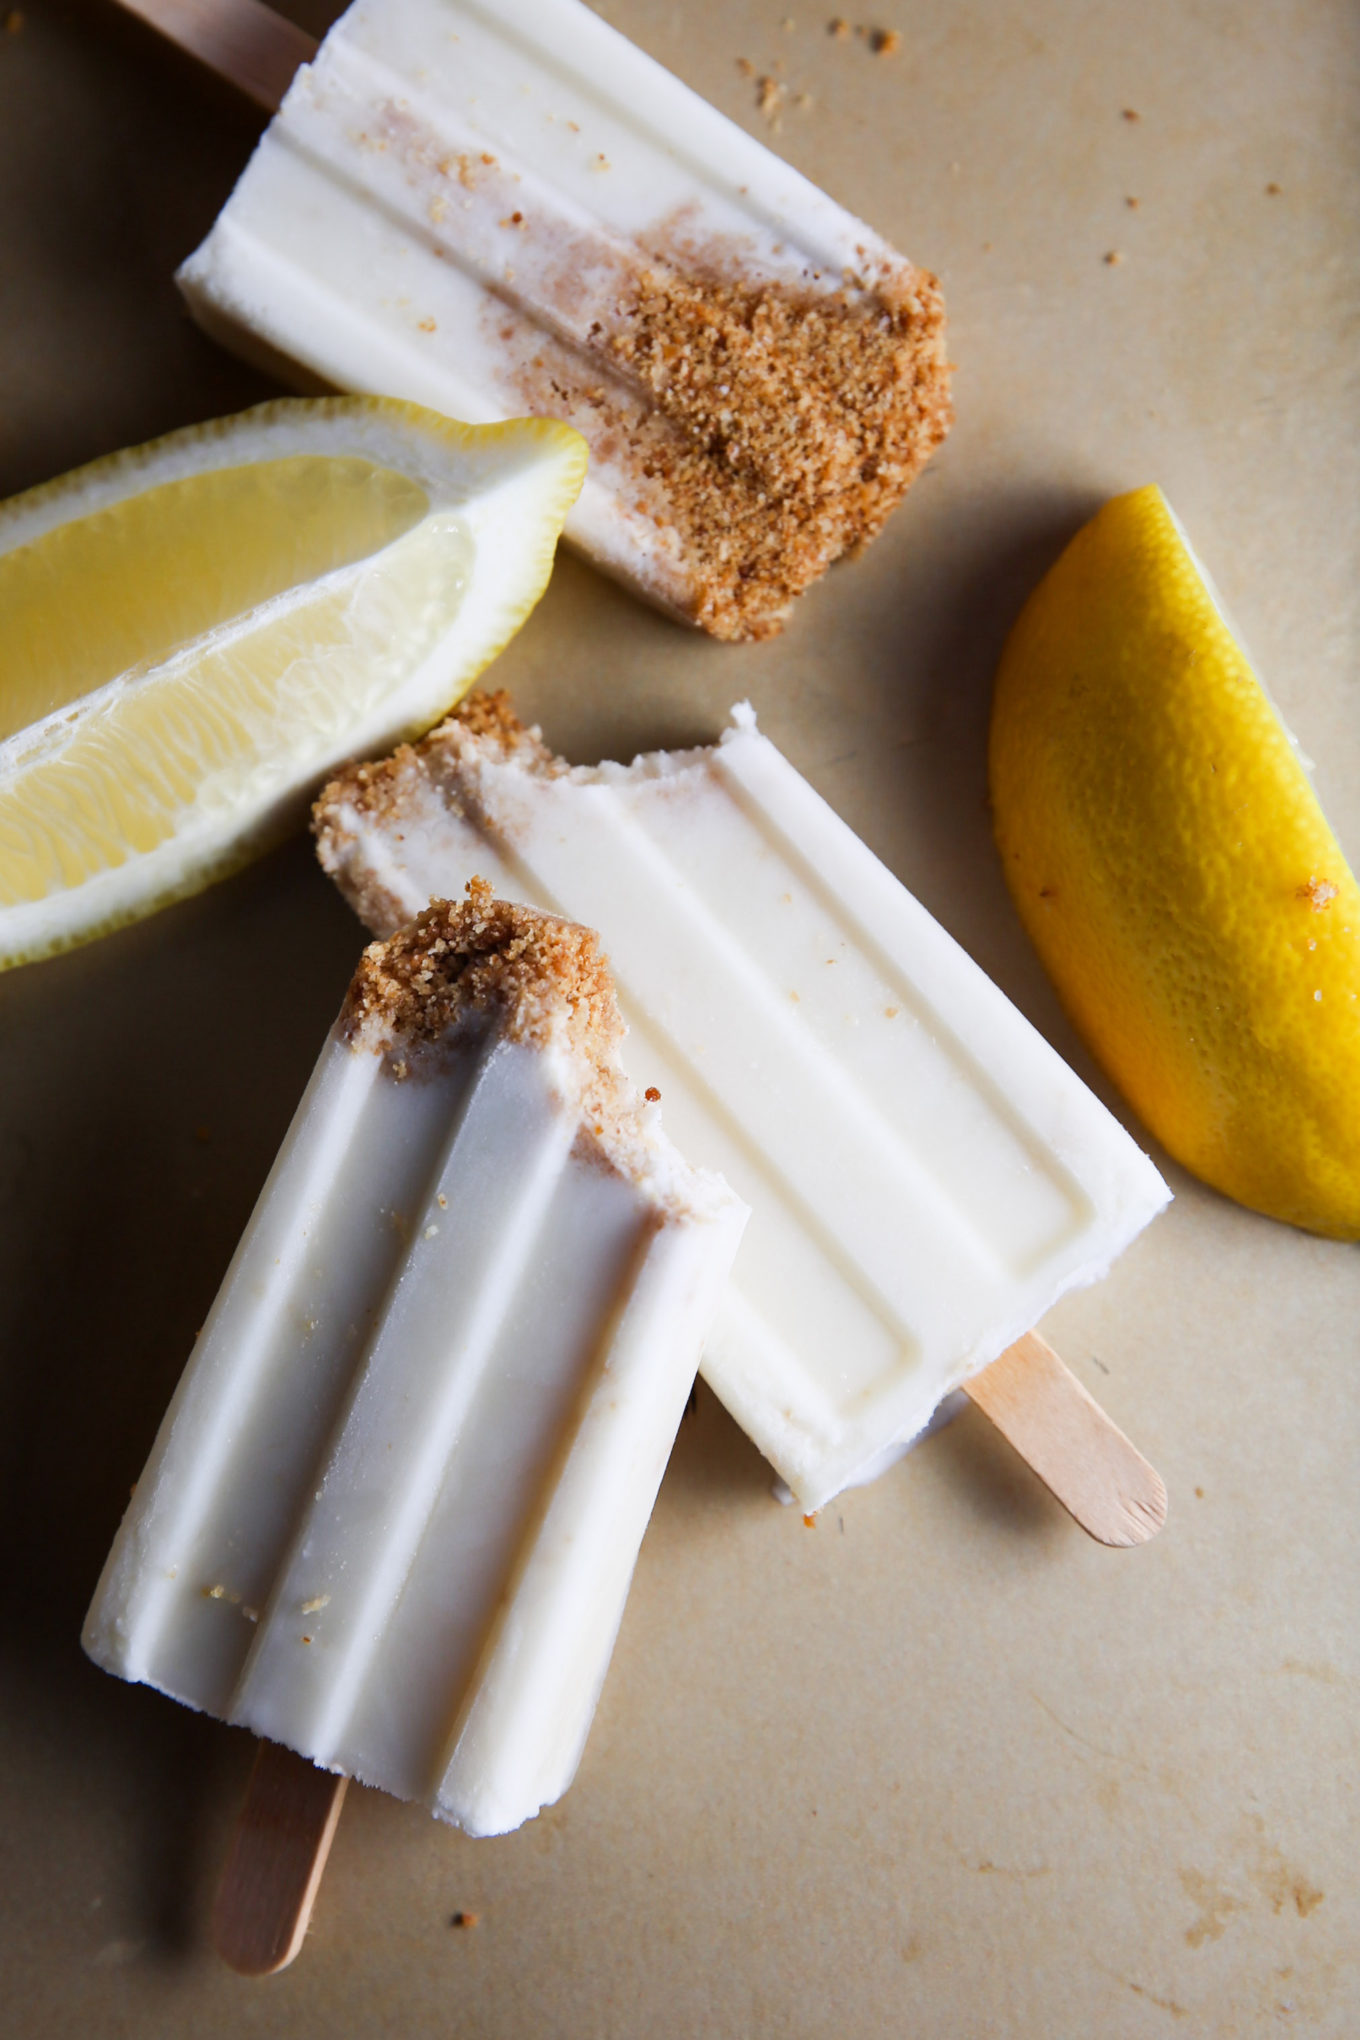 Three lemon pie-flavored paletas with brown sugar crust on a beige surface, accompanied by fresh lemon wedges. The paletas are partially visible and rest vertically.